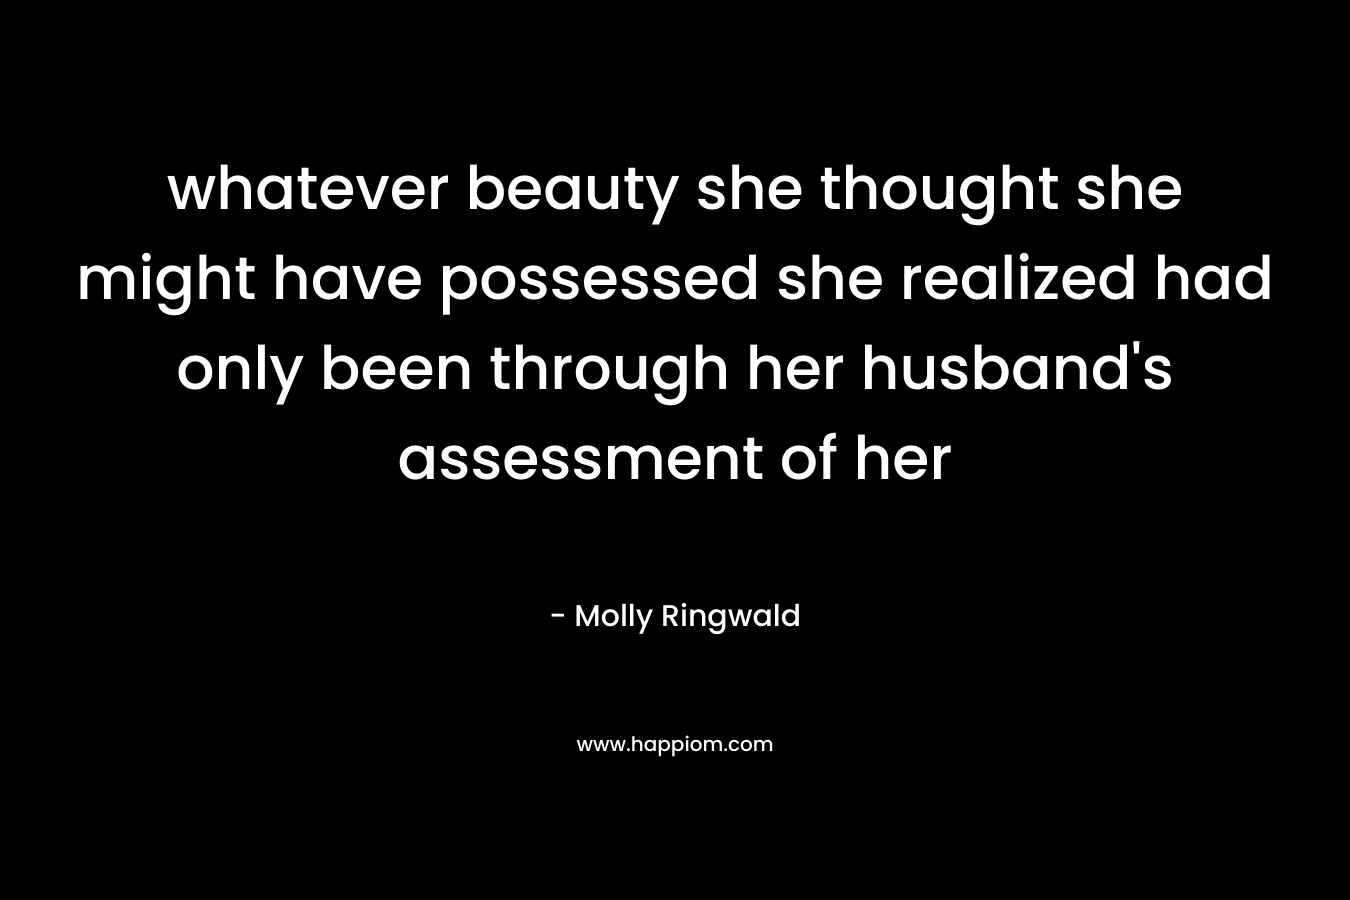 whatever beauty she thought she might have possessed she realized had only been through her husband’s assessment of her – Molly Ringwald